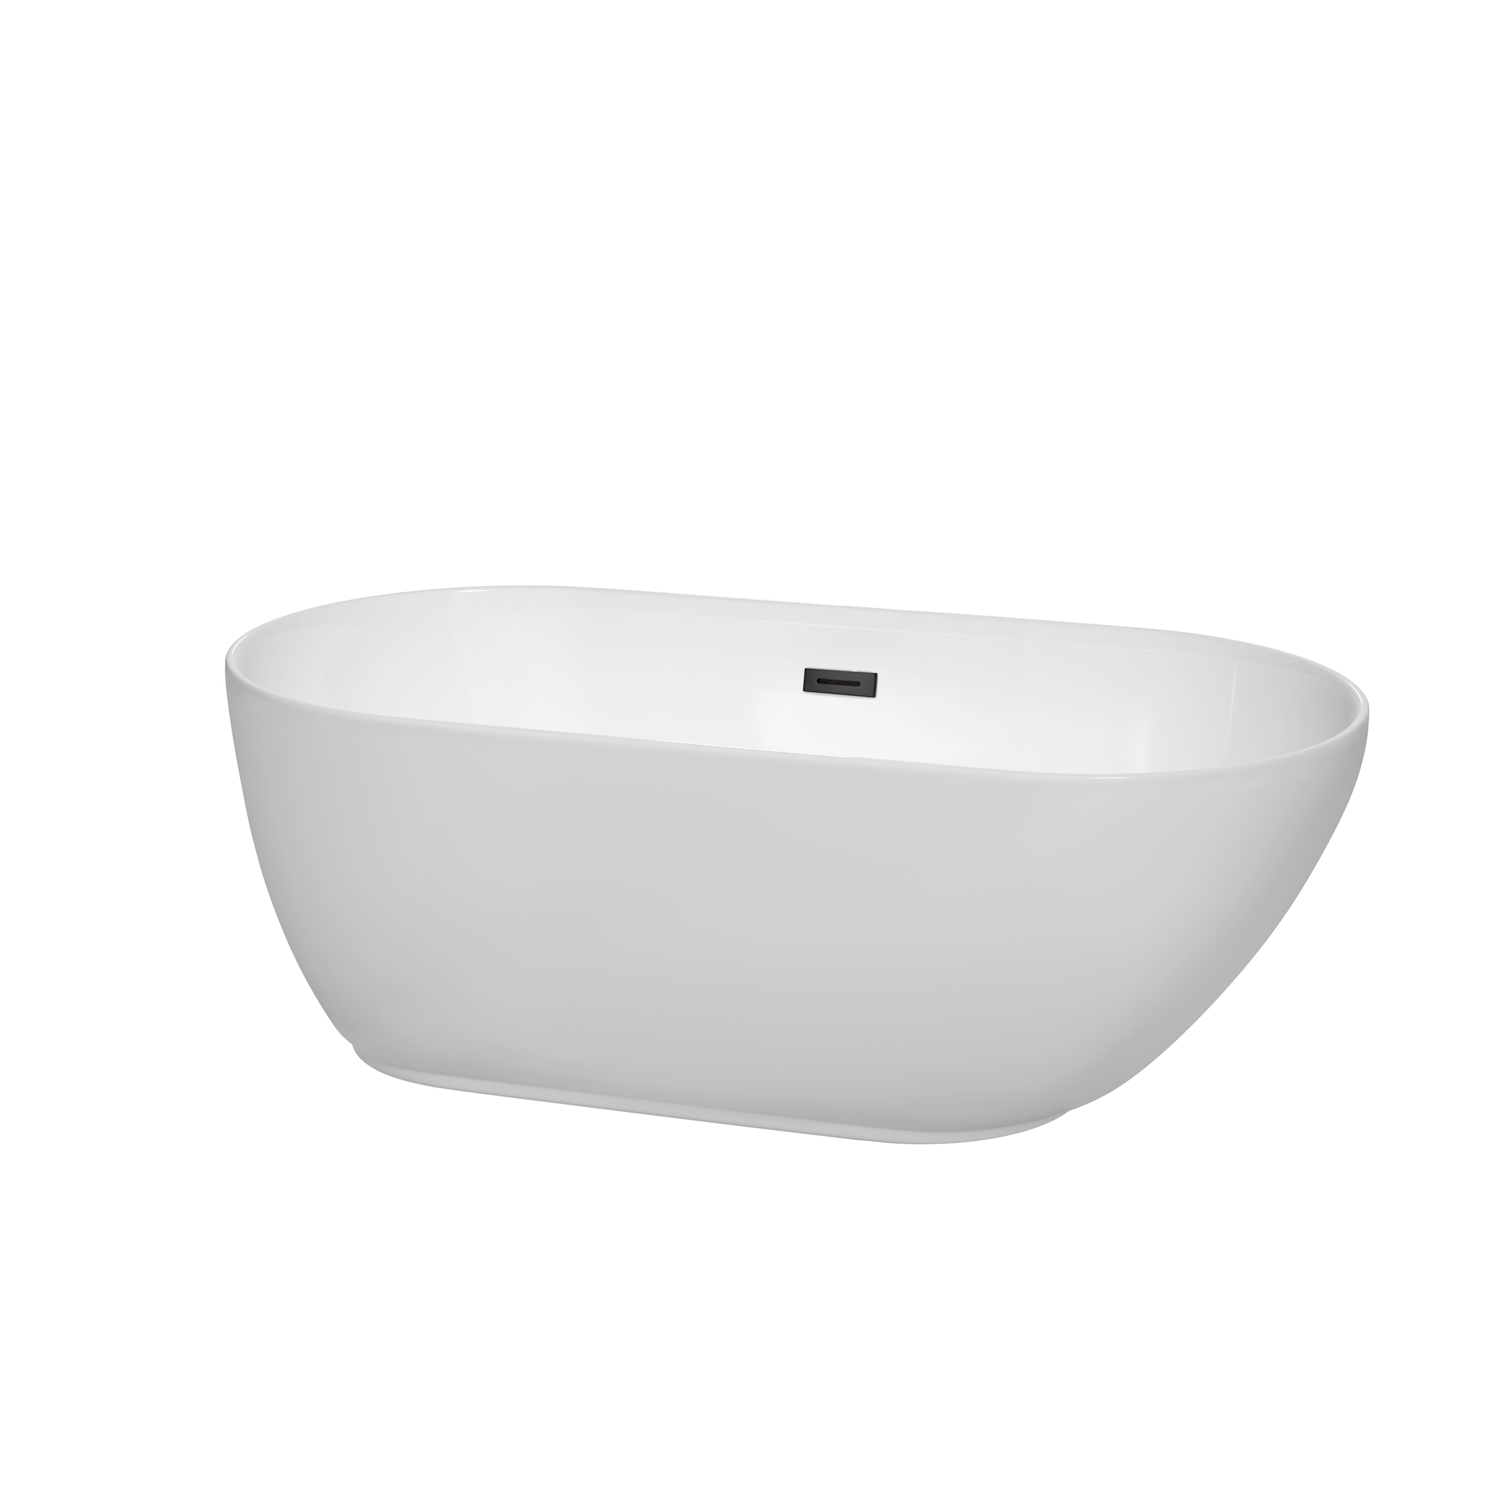 60" Freestanding Bathtub in White with Matte Black Drain and Overflow Trim